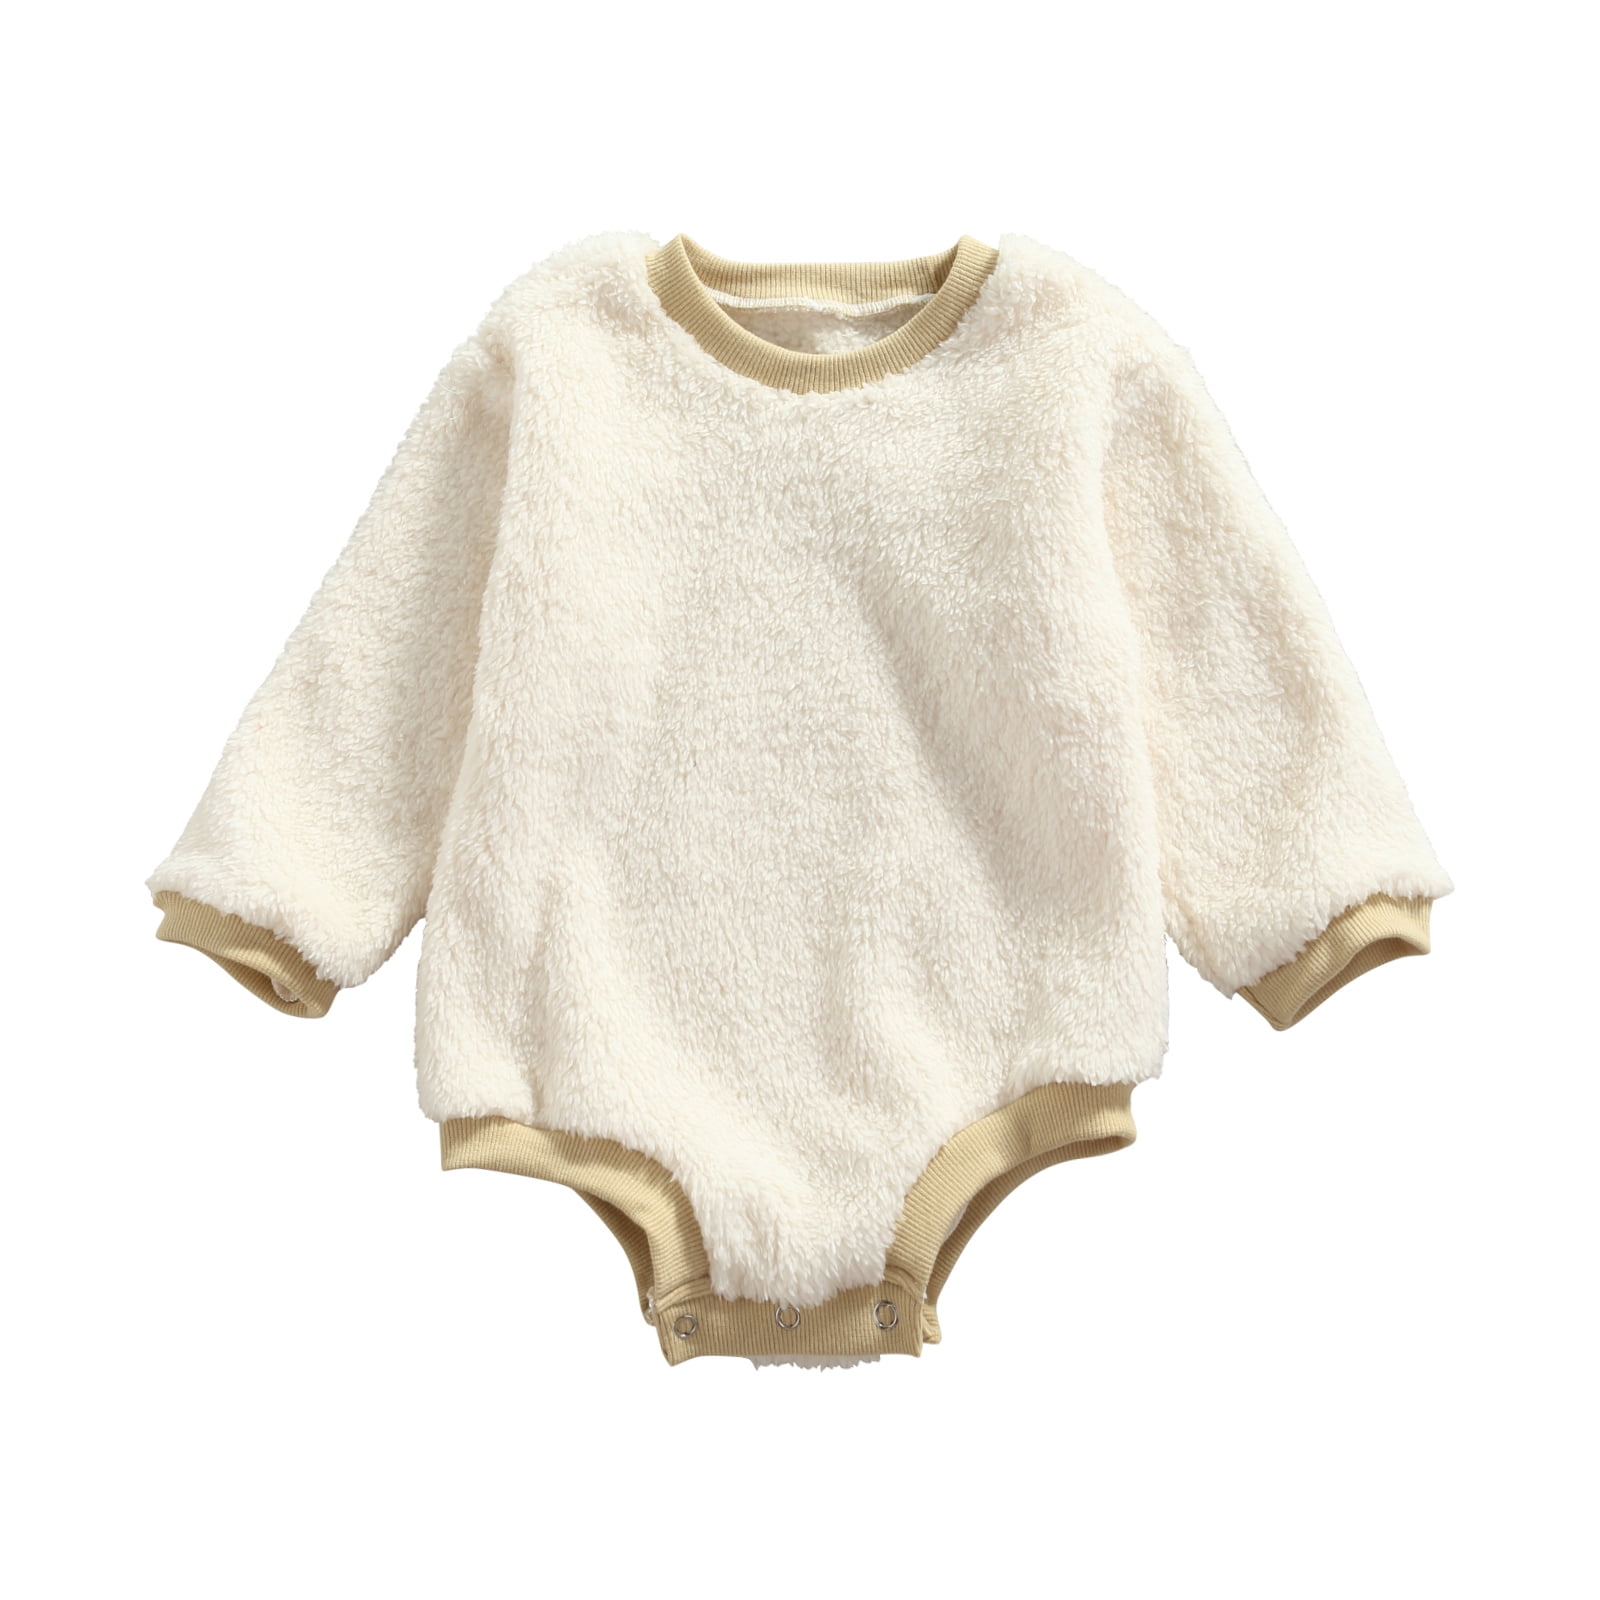 Baby Girl Boy Knit Sweater Solid Oversized Sweater Crewneck Sweatshirt Pullover Top Infant Warm Clothes